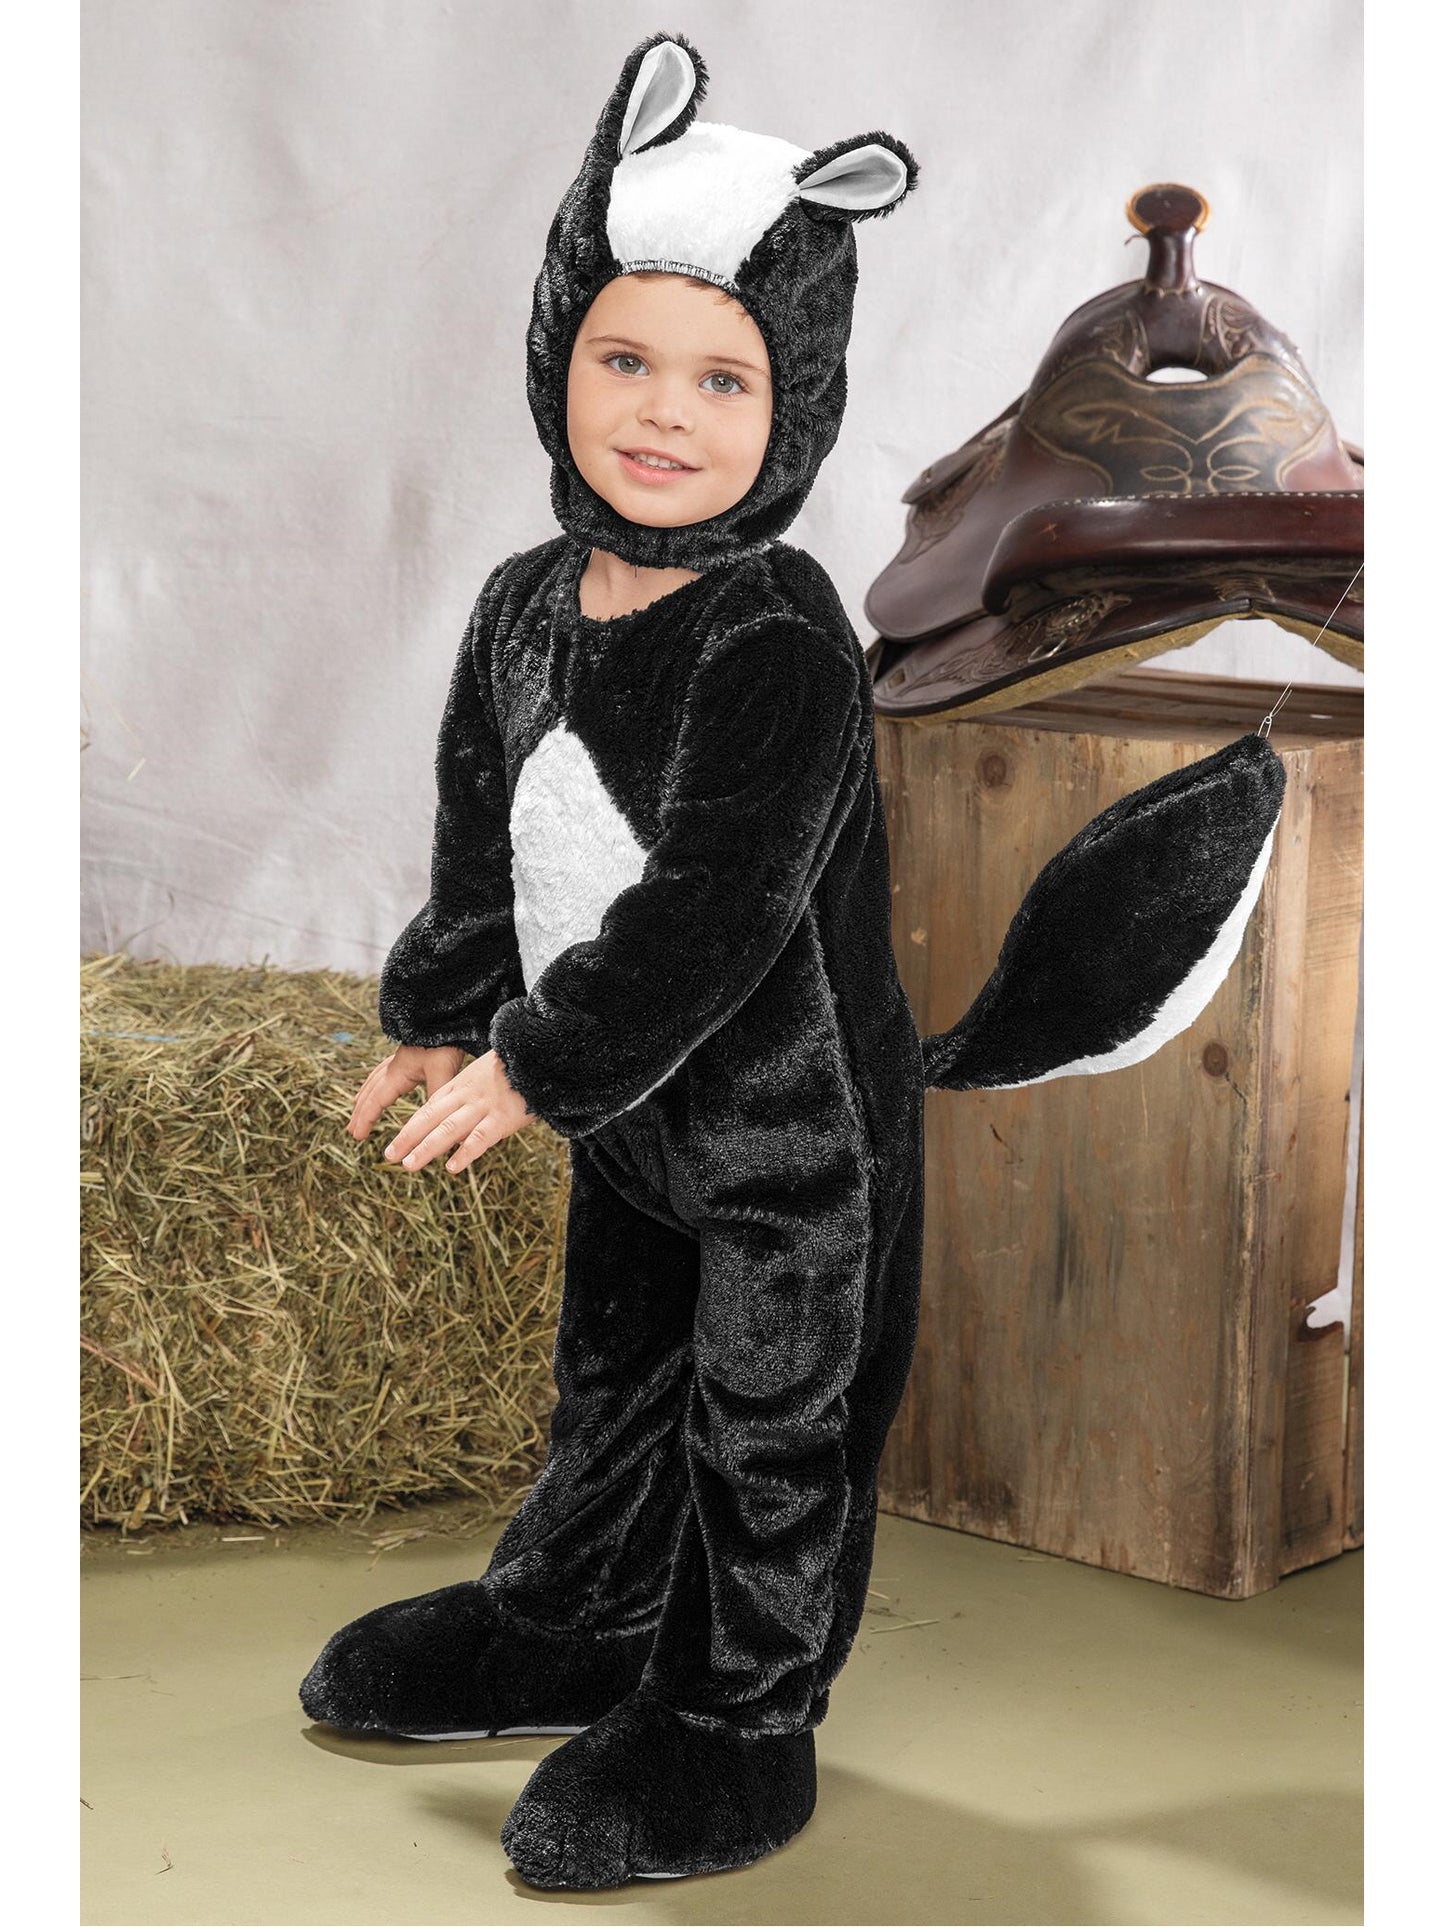 Skunk costume adults Guardian bikes for adults